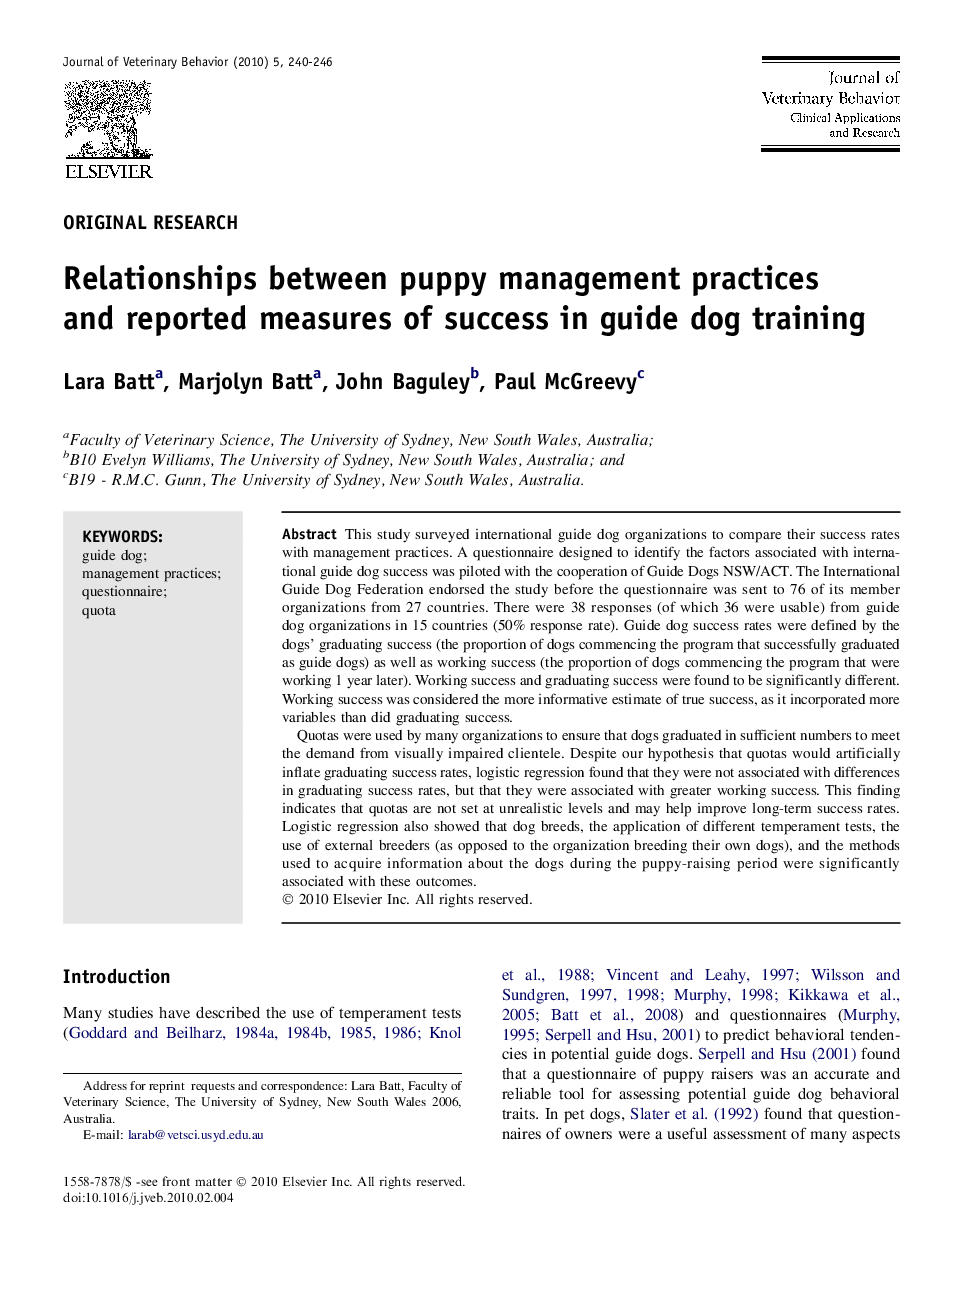 Relationships between puppy management practices and reported measures of success in guide dog training